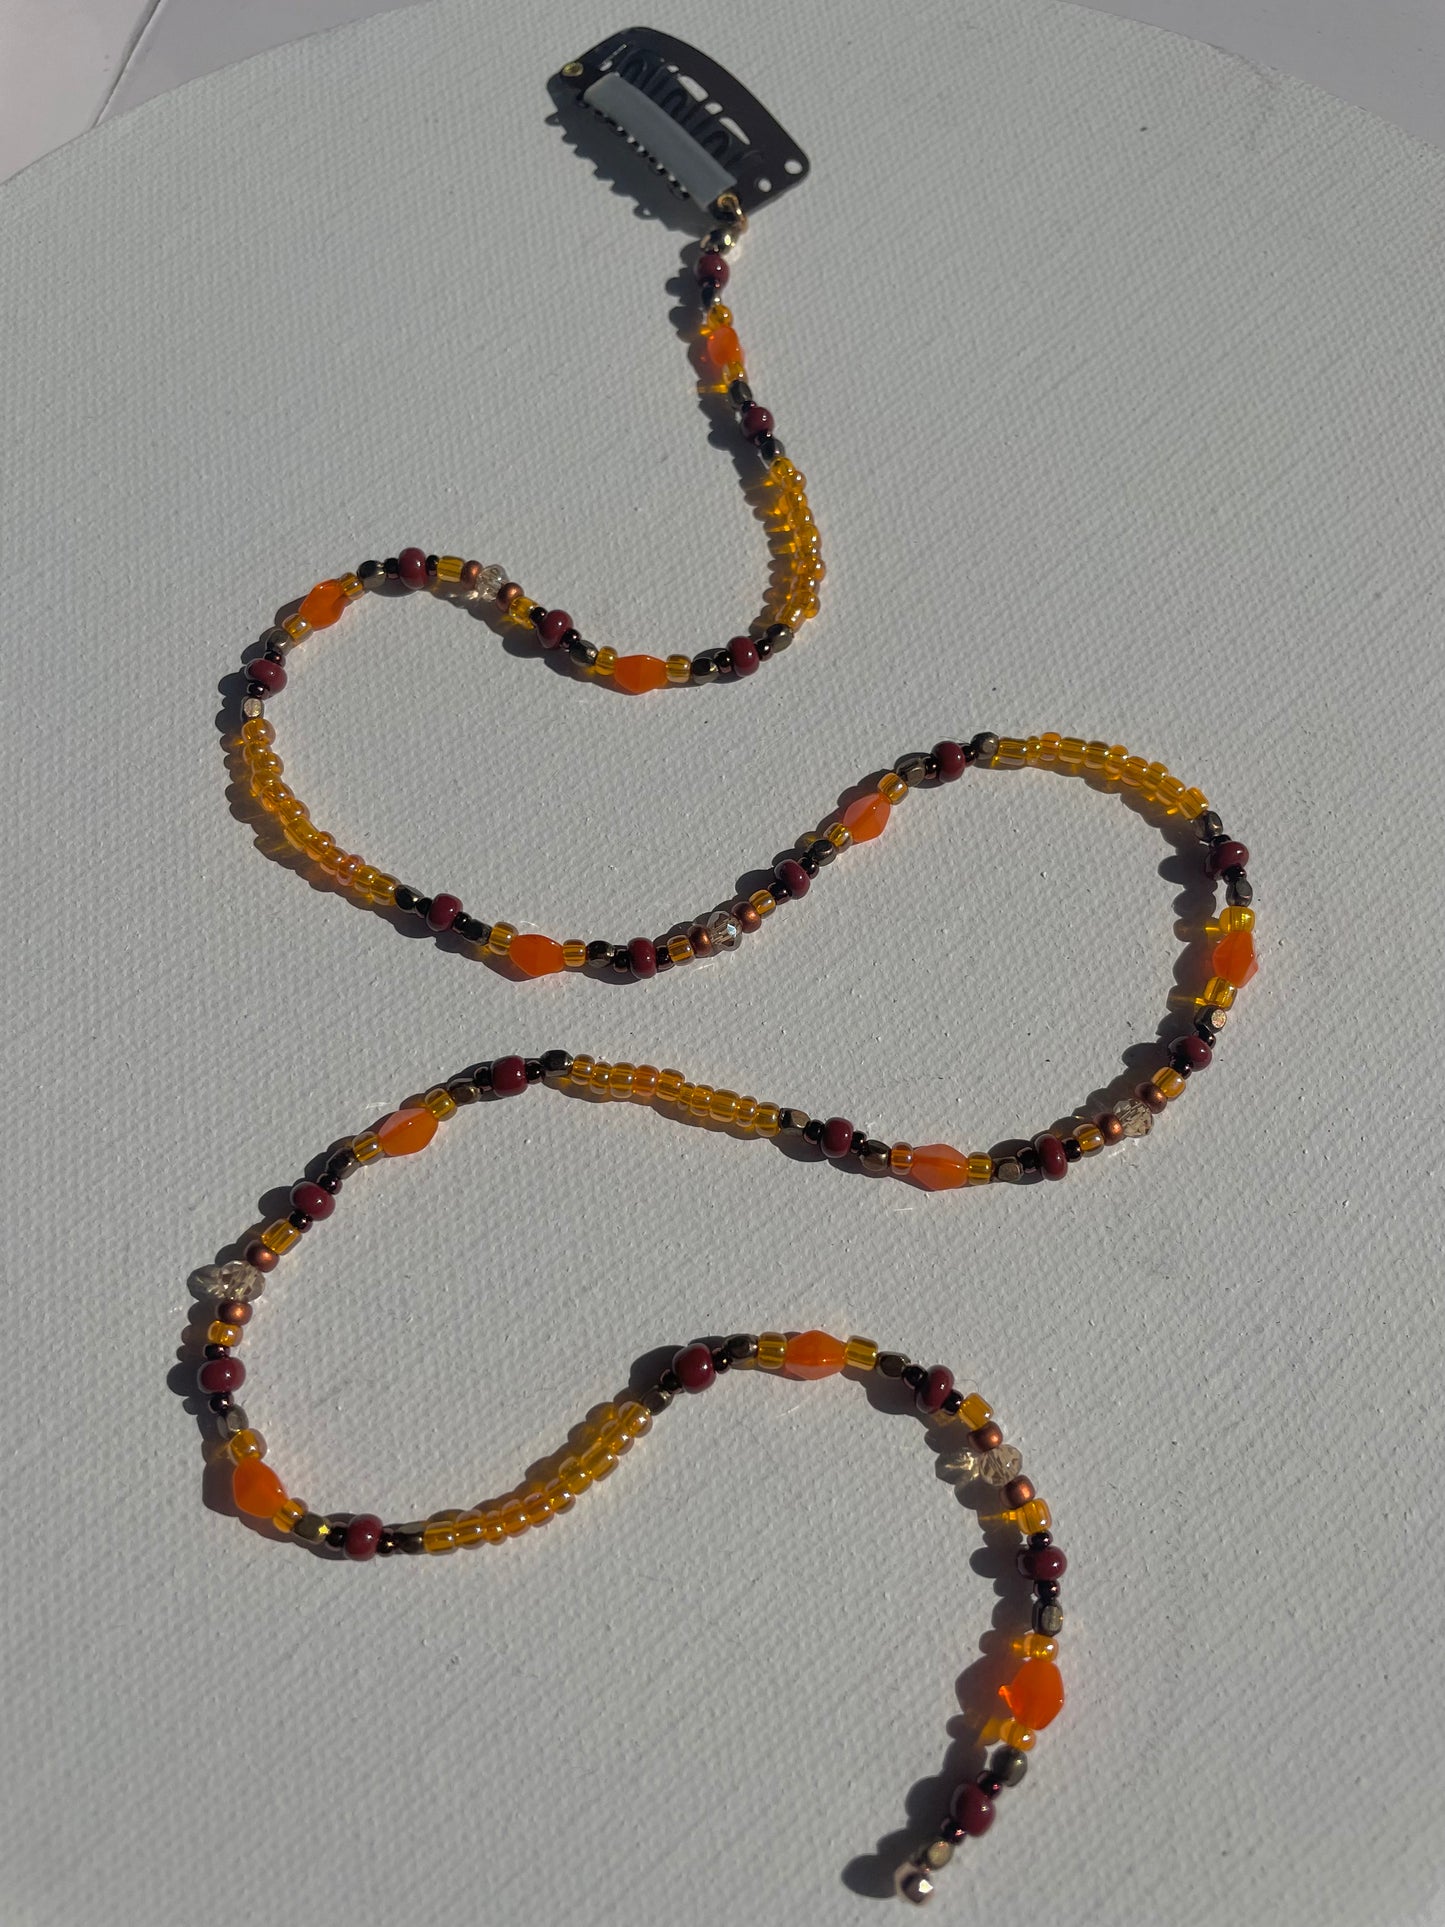 Two Suns in the Sunset Hair Chain (19")